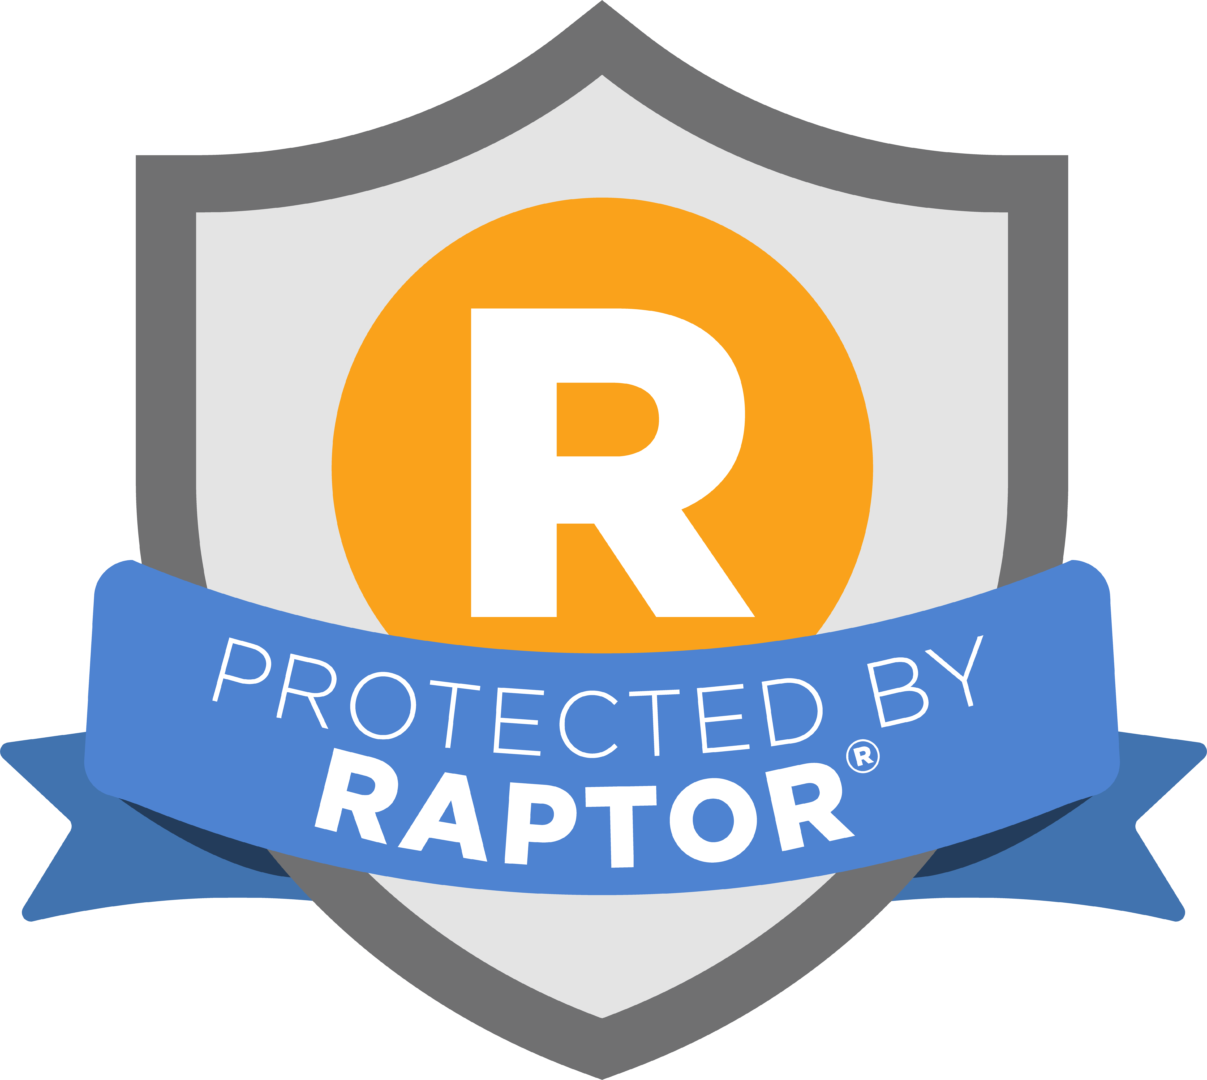 Protected by Raptor